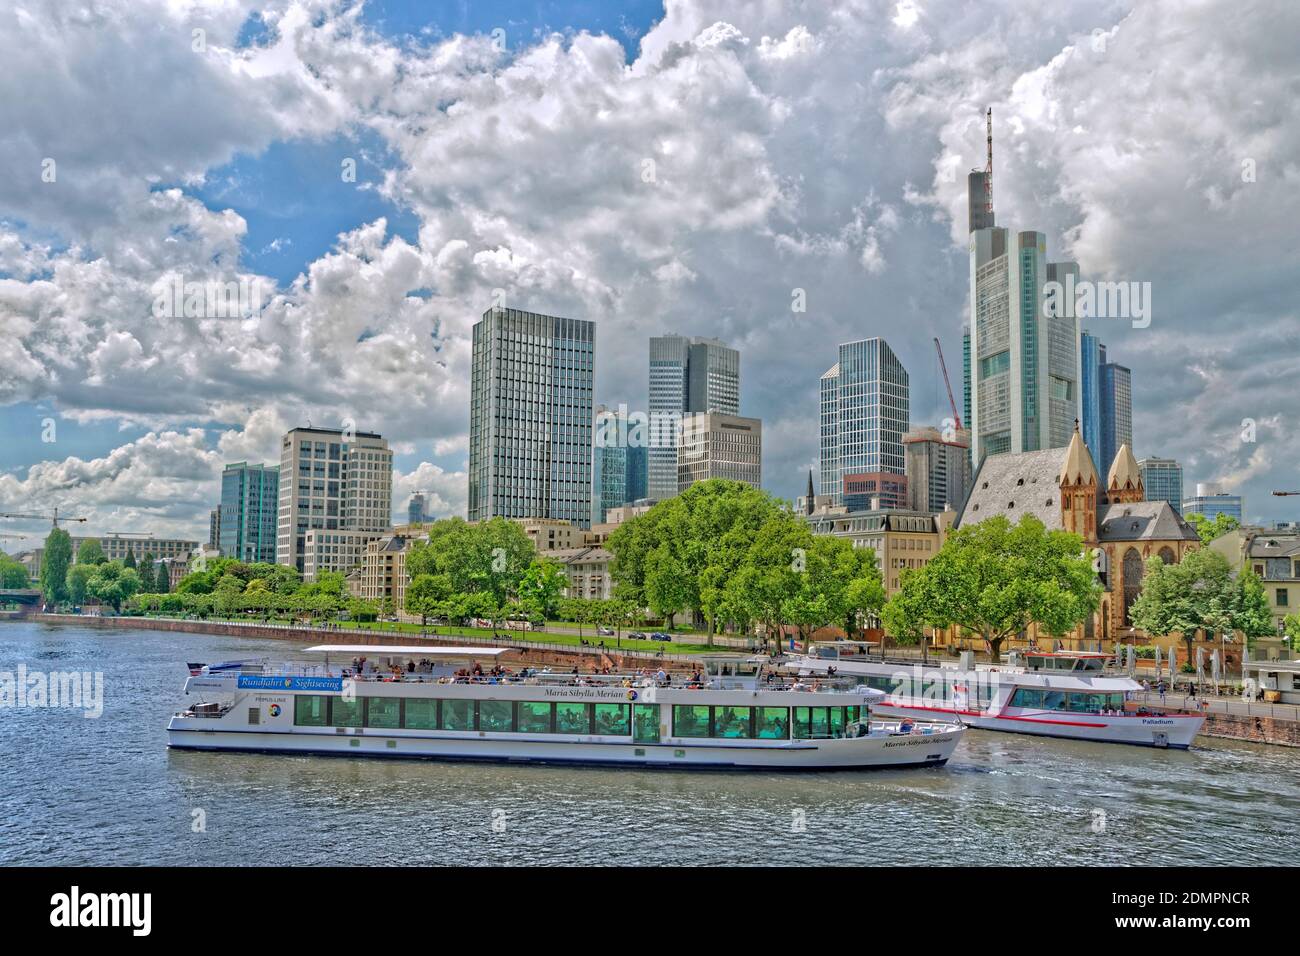 River Main and financial district of Frankfurt, Germany. Stock Photo